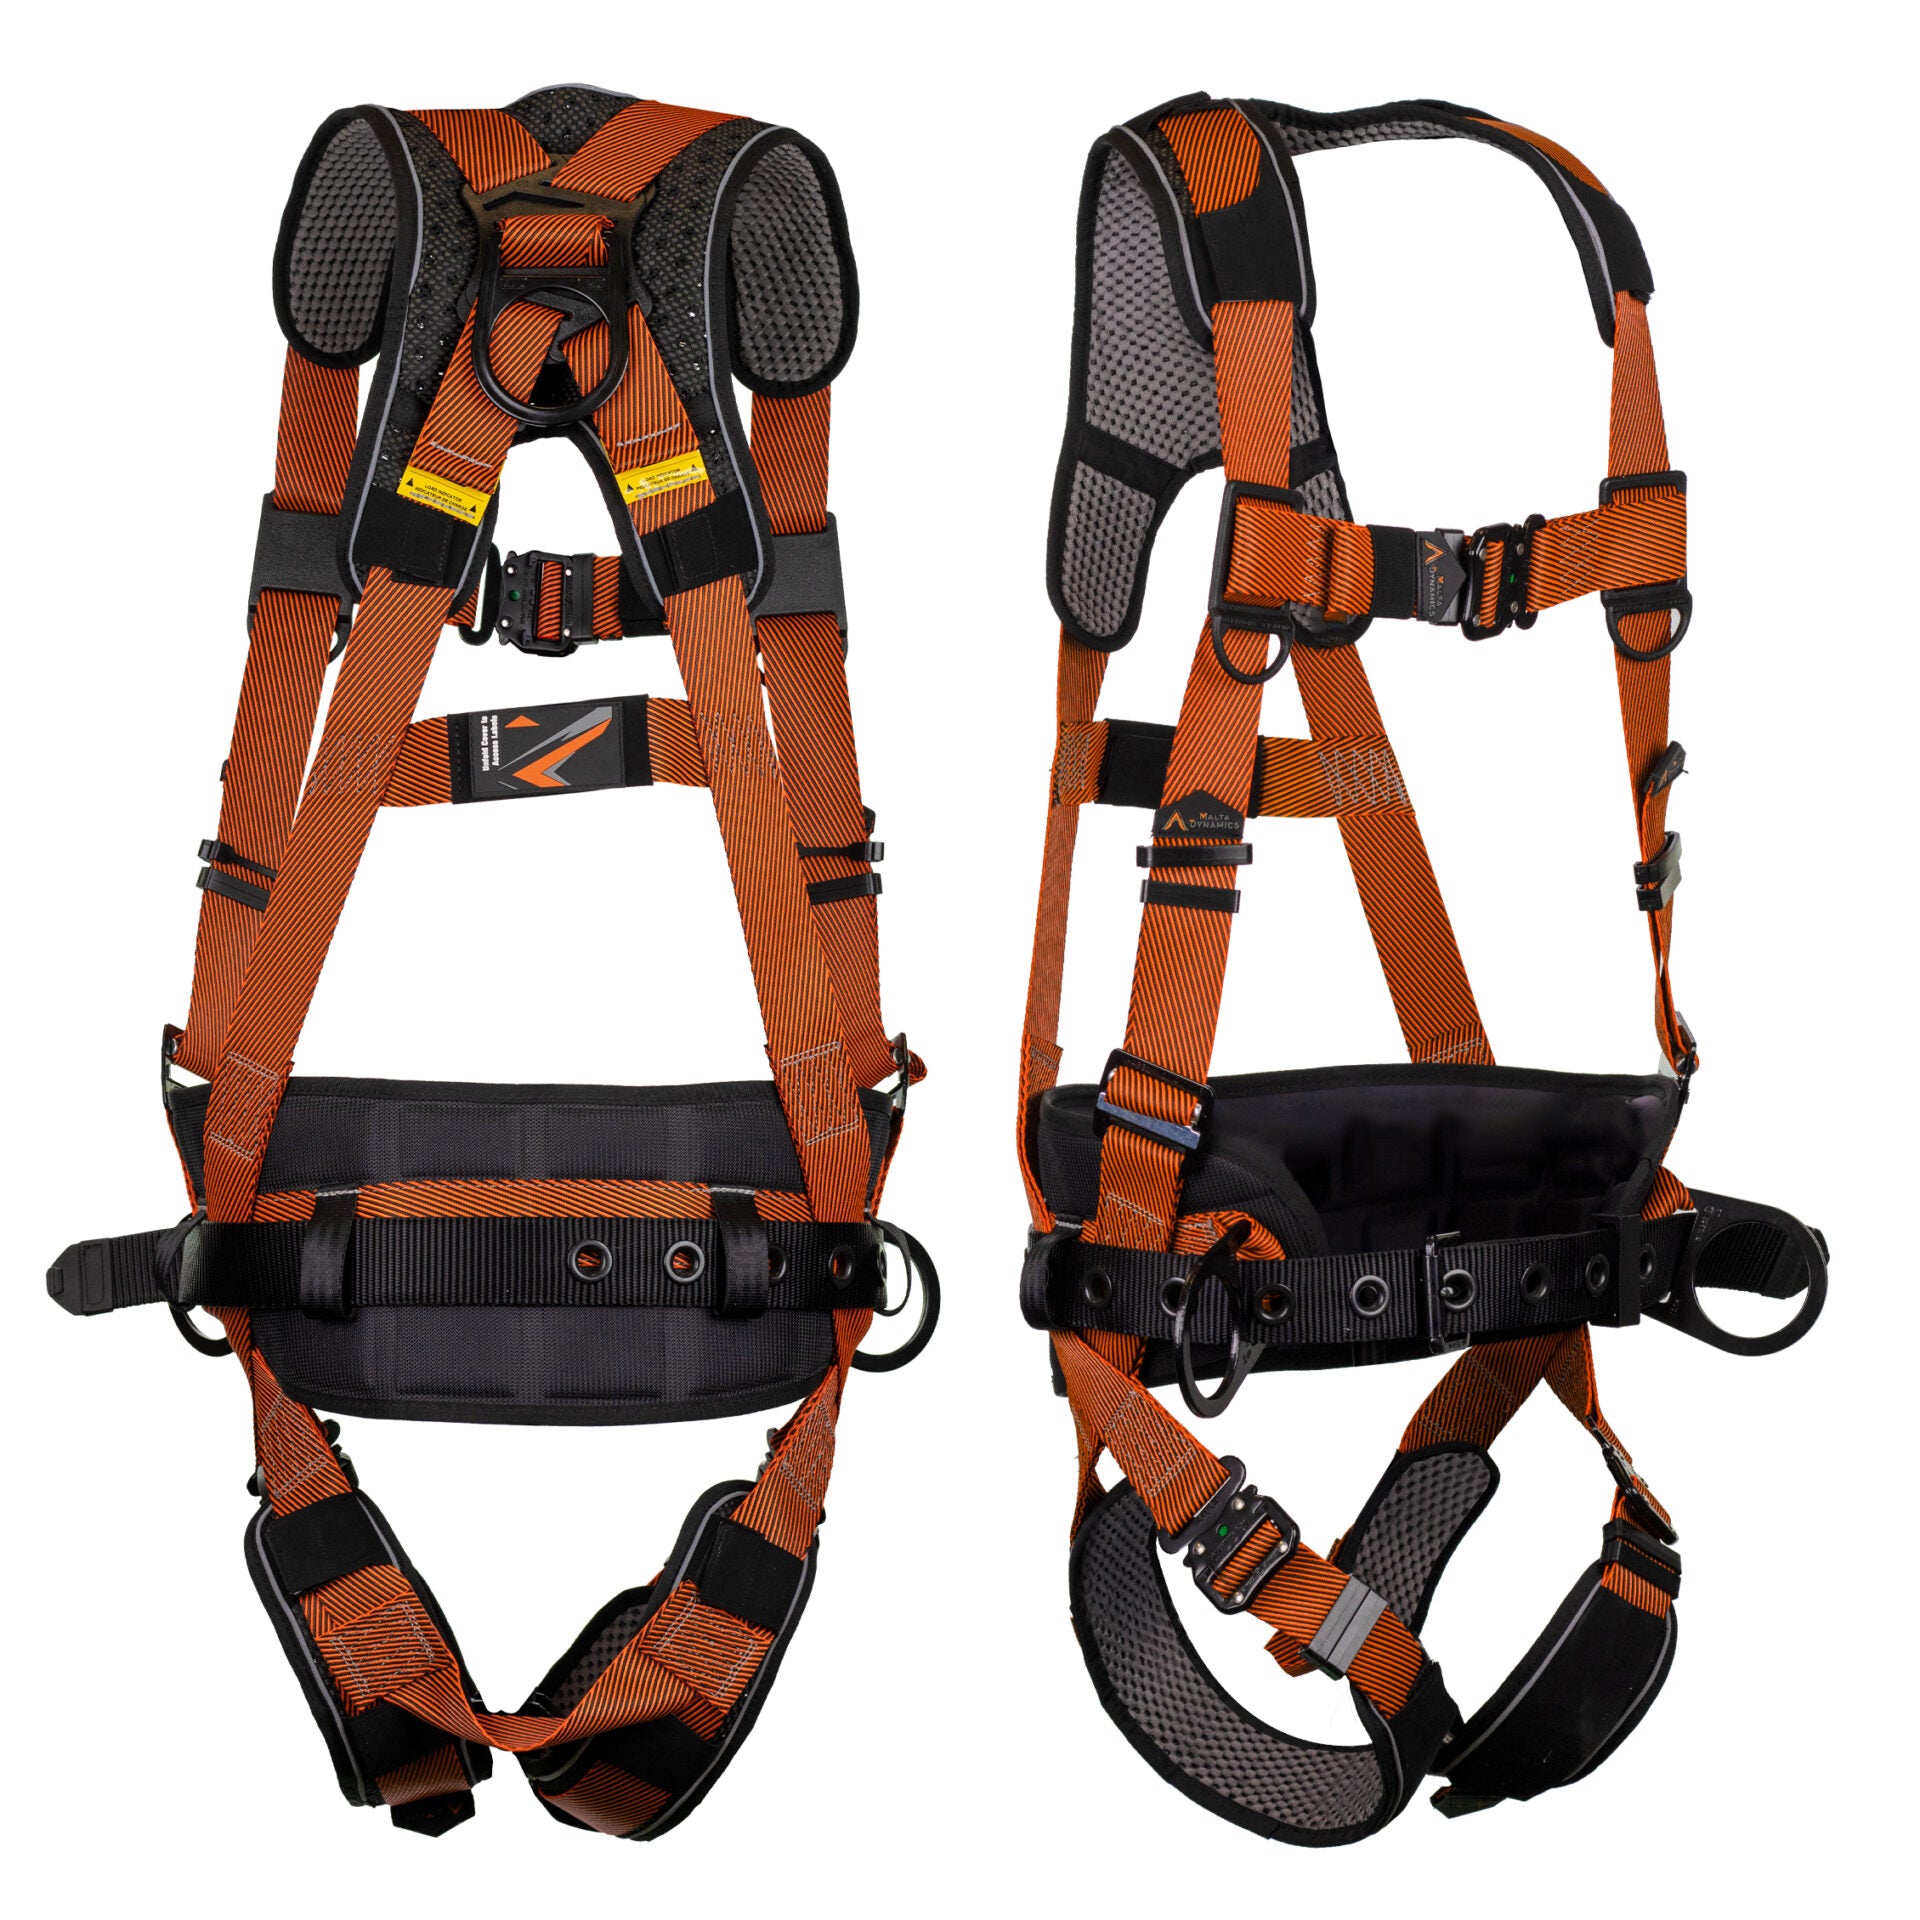 WARTHOG® Comfort Maxx Belted Side D-Ring Harness